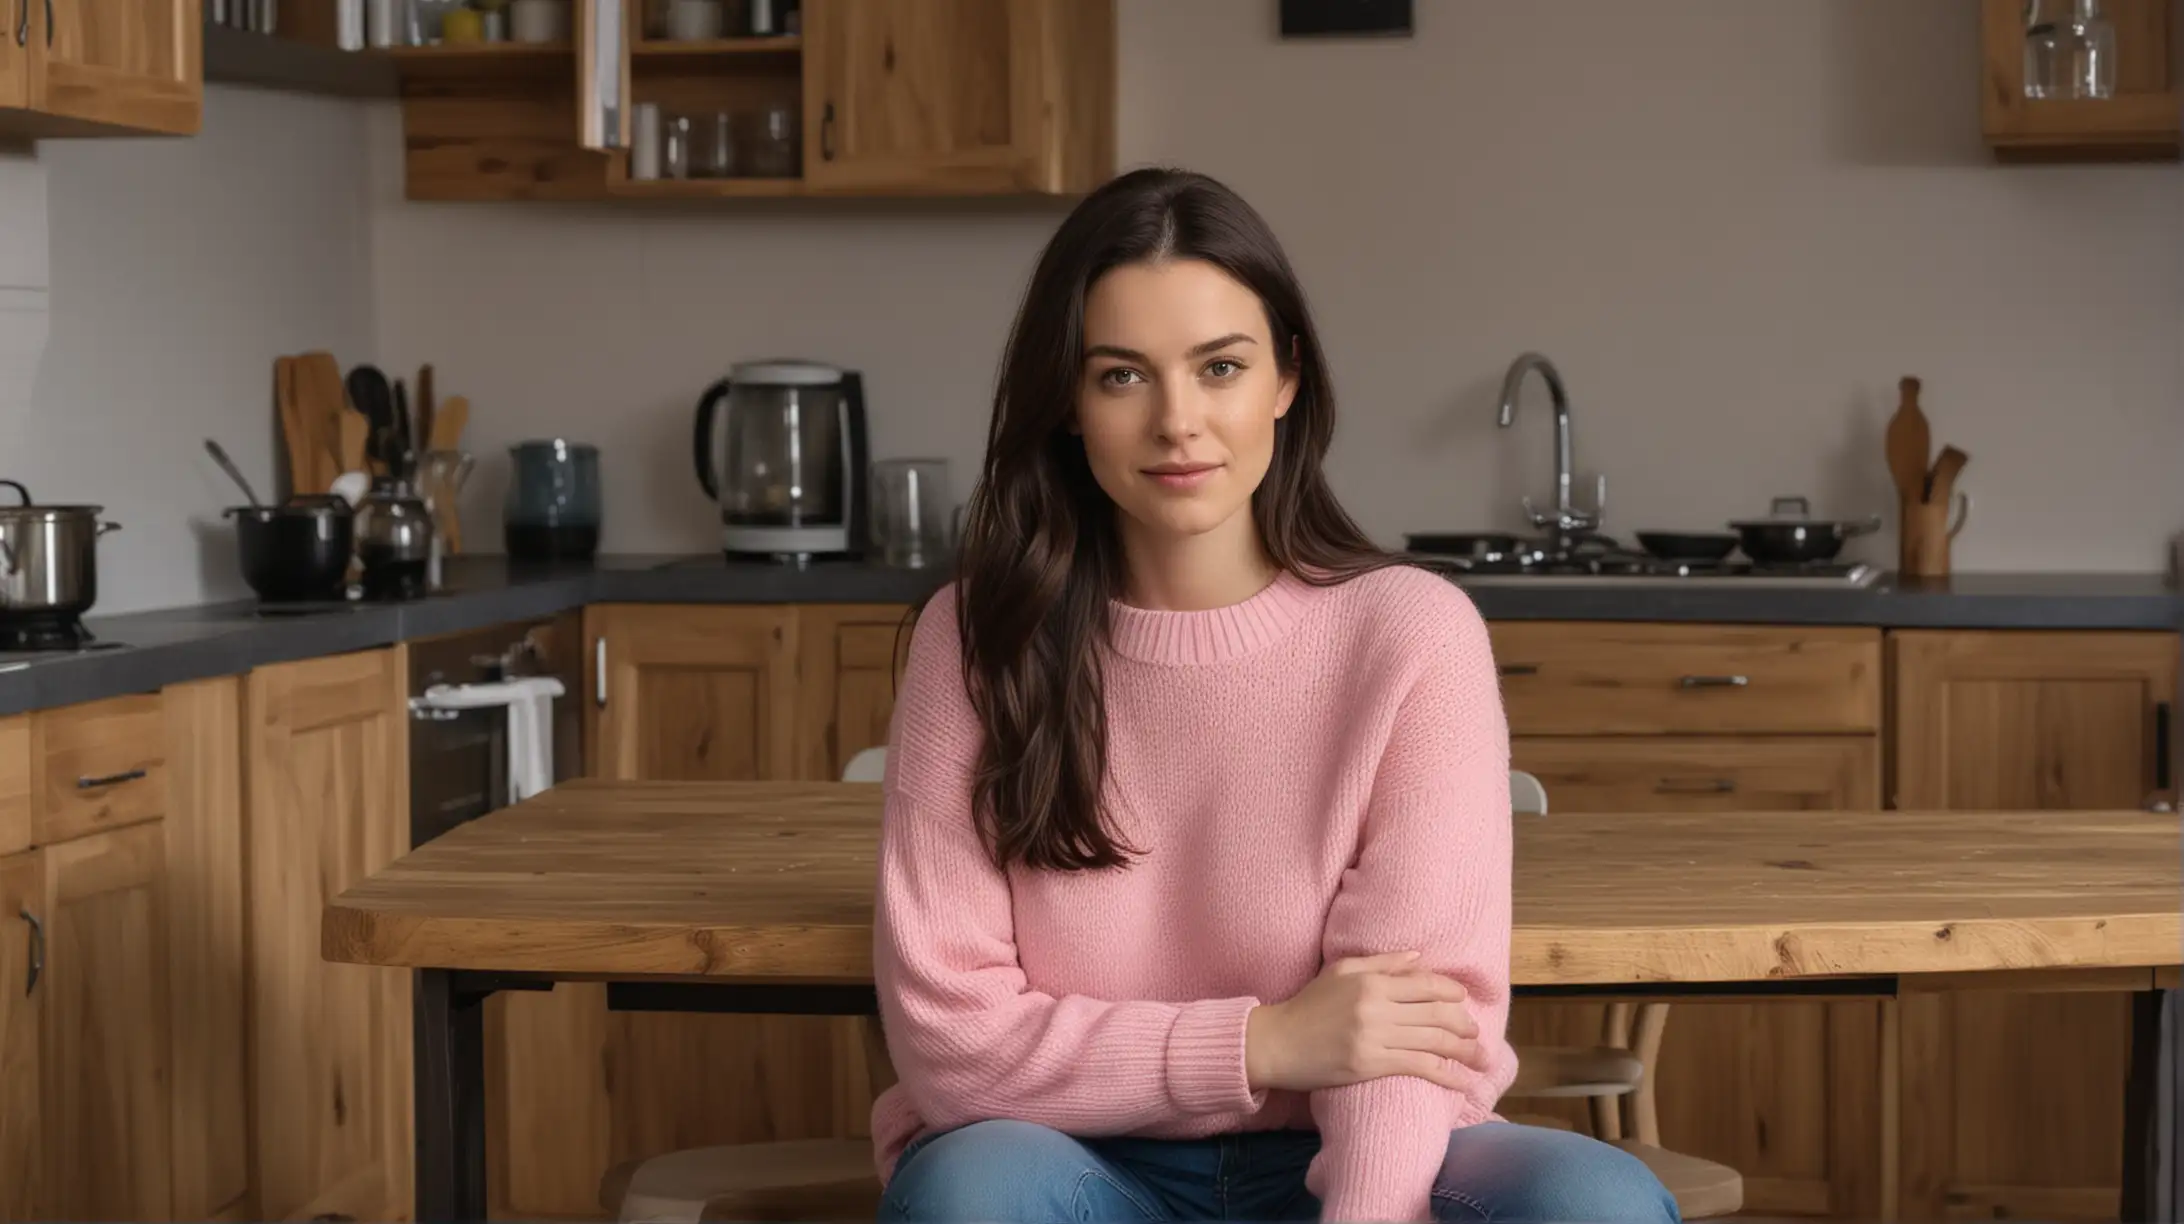 Modern Kitchen Portrait Woman in Pink Sweater Sitting at Table